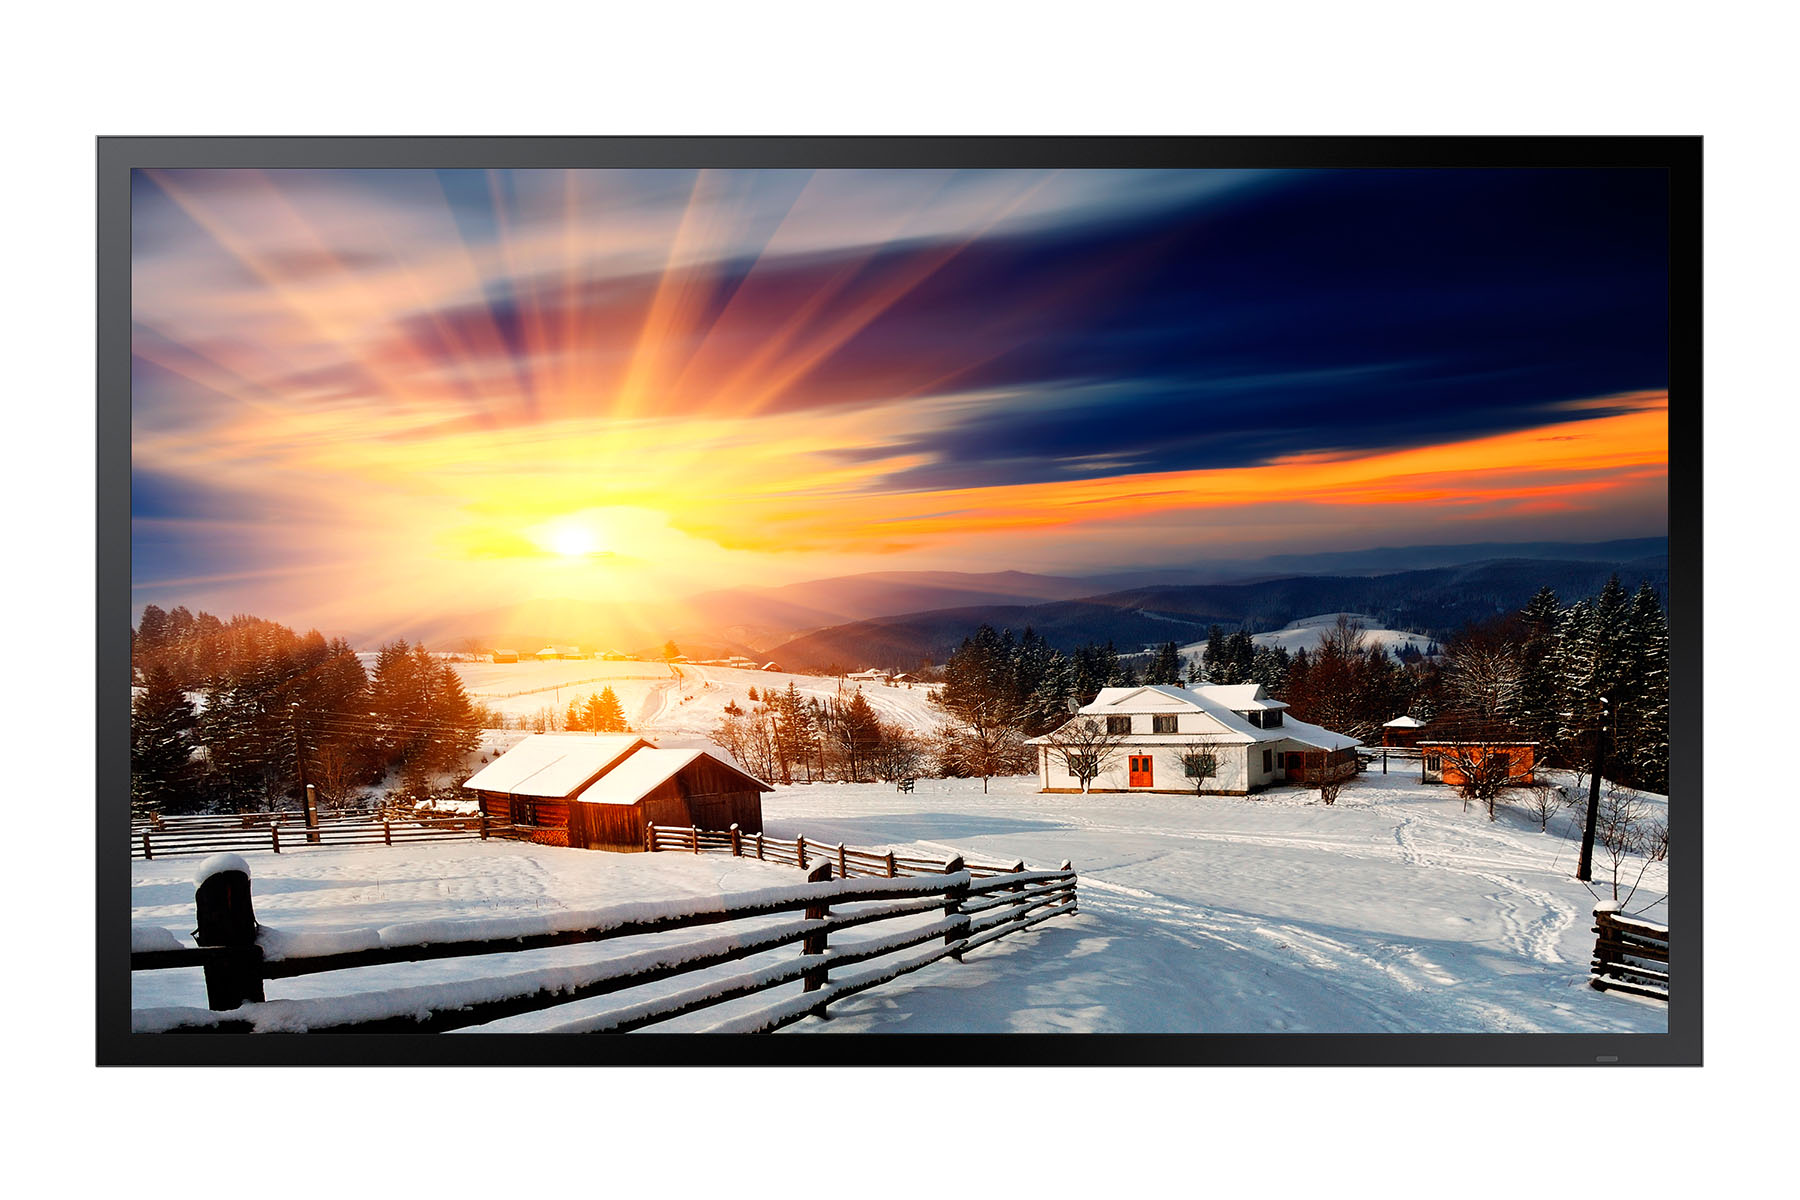 Samsung 46" 16:9, OH46B, IP56 rated display kit with protection glass, integrated power box, 3500n Fönsterskärmar